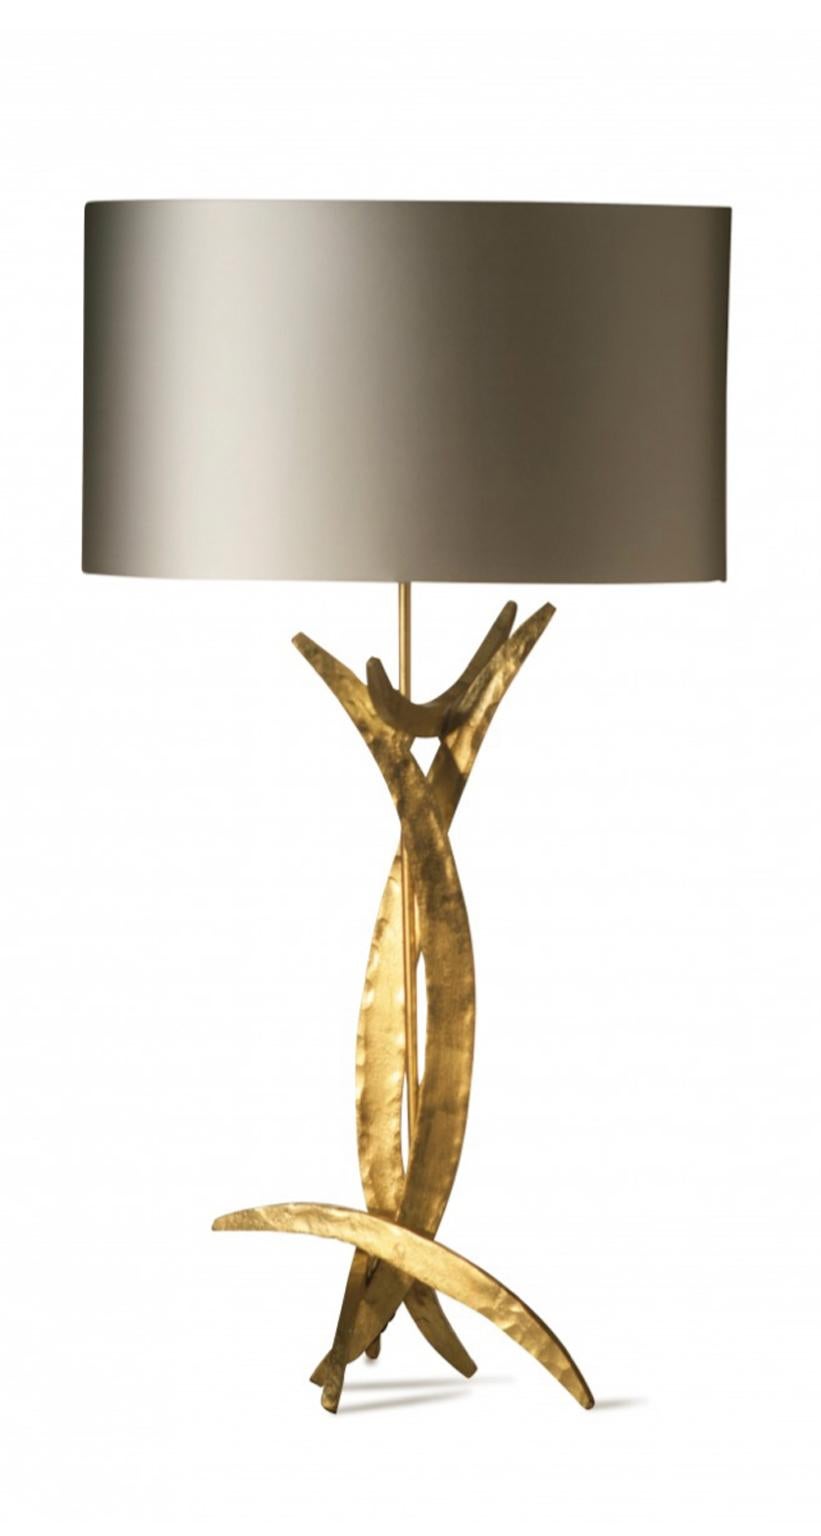 This pair of steel forged table lamps has a raw shape with its metal parts in bright gold finish or burnished one. In the photo is visible the bright one.
The contrast is stronger with the presence of the silk oval lamp shade. This Brutalist style